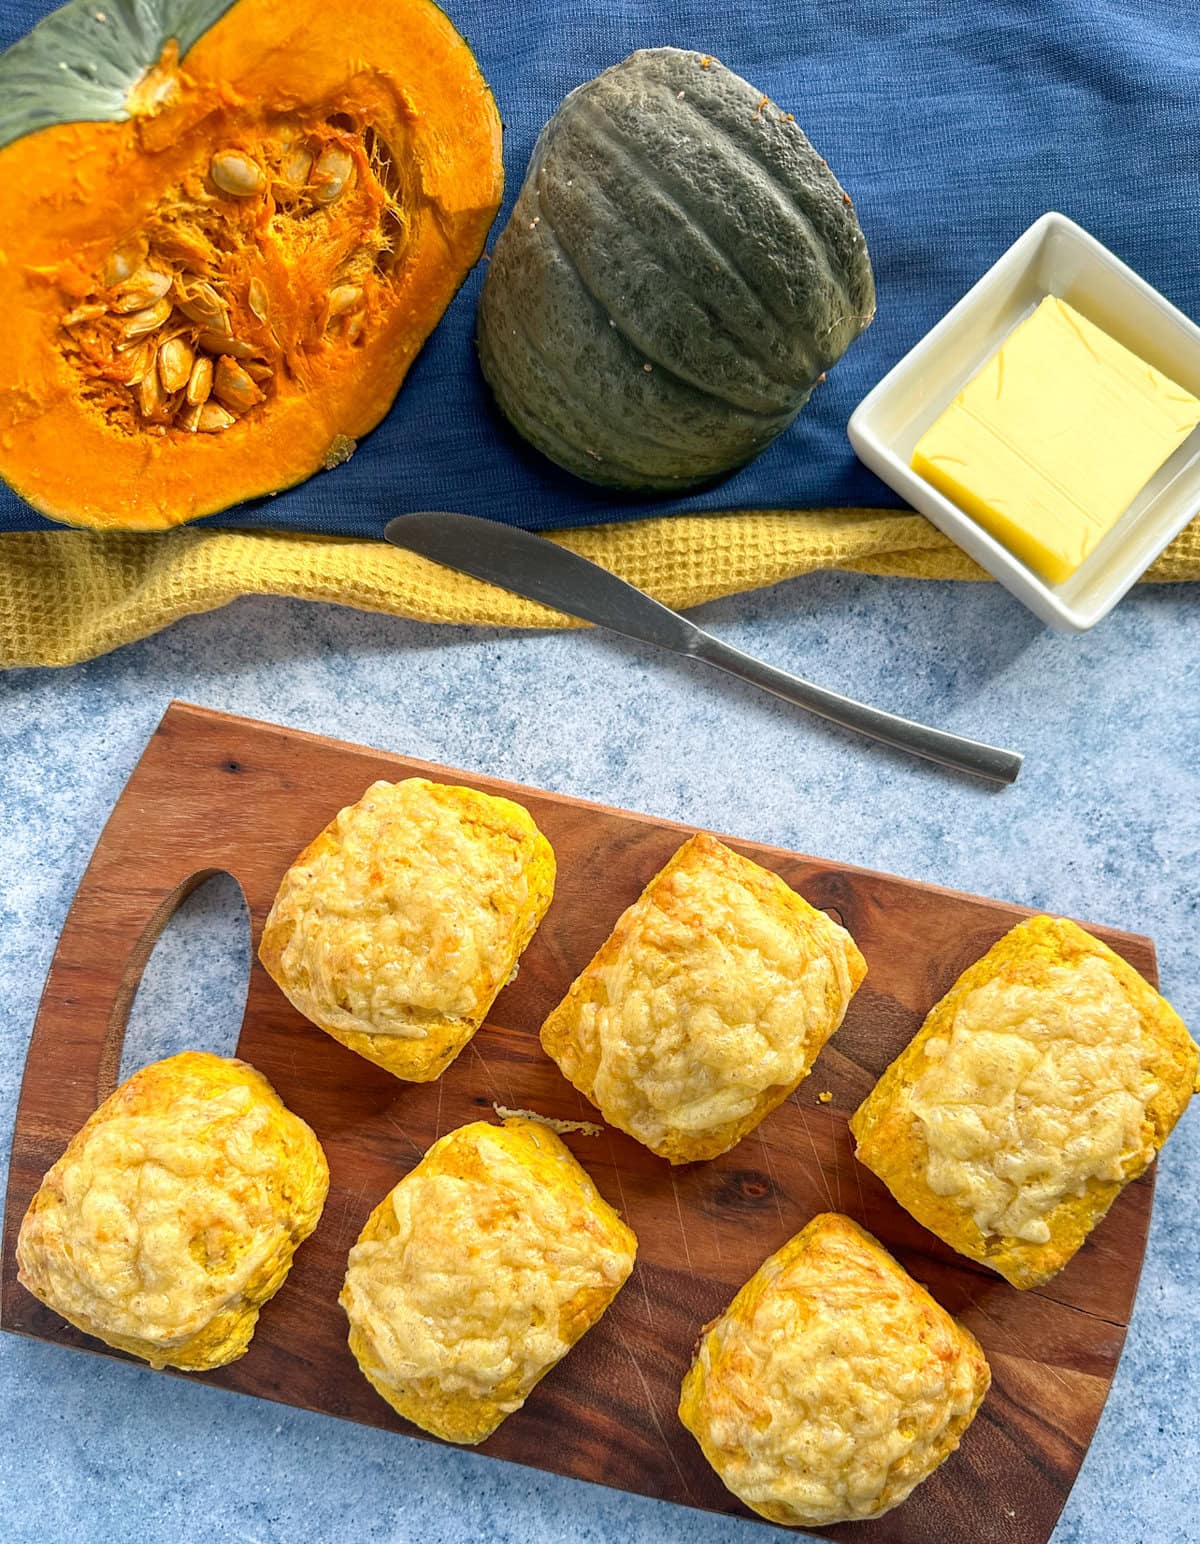 Pumpkin and cheese scones on a wooden board